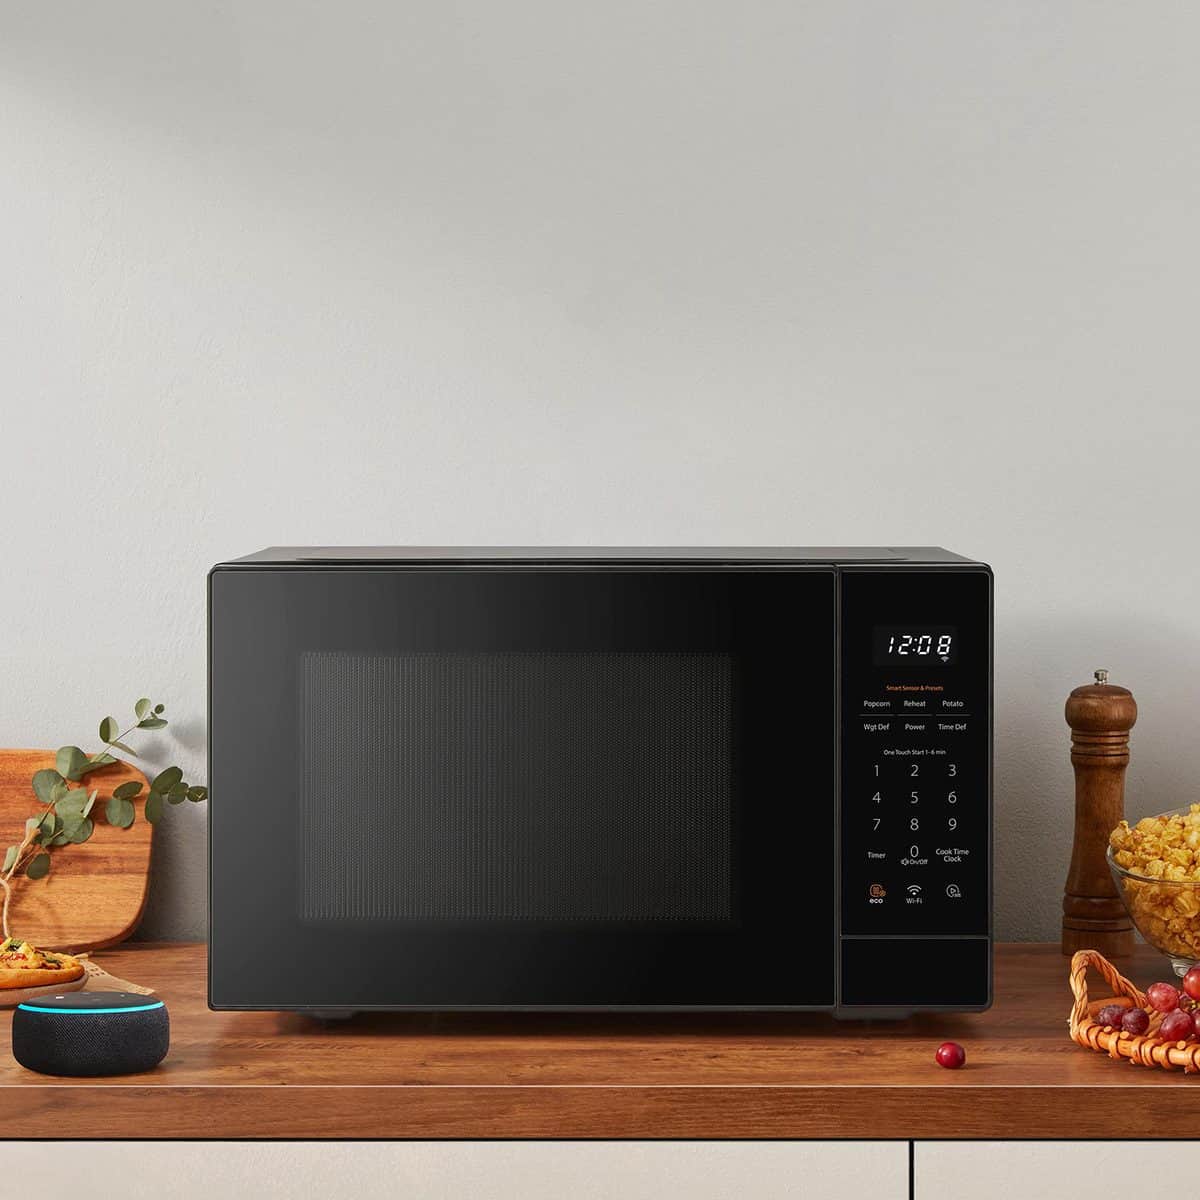 Microwave and voice assistant in kitchen